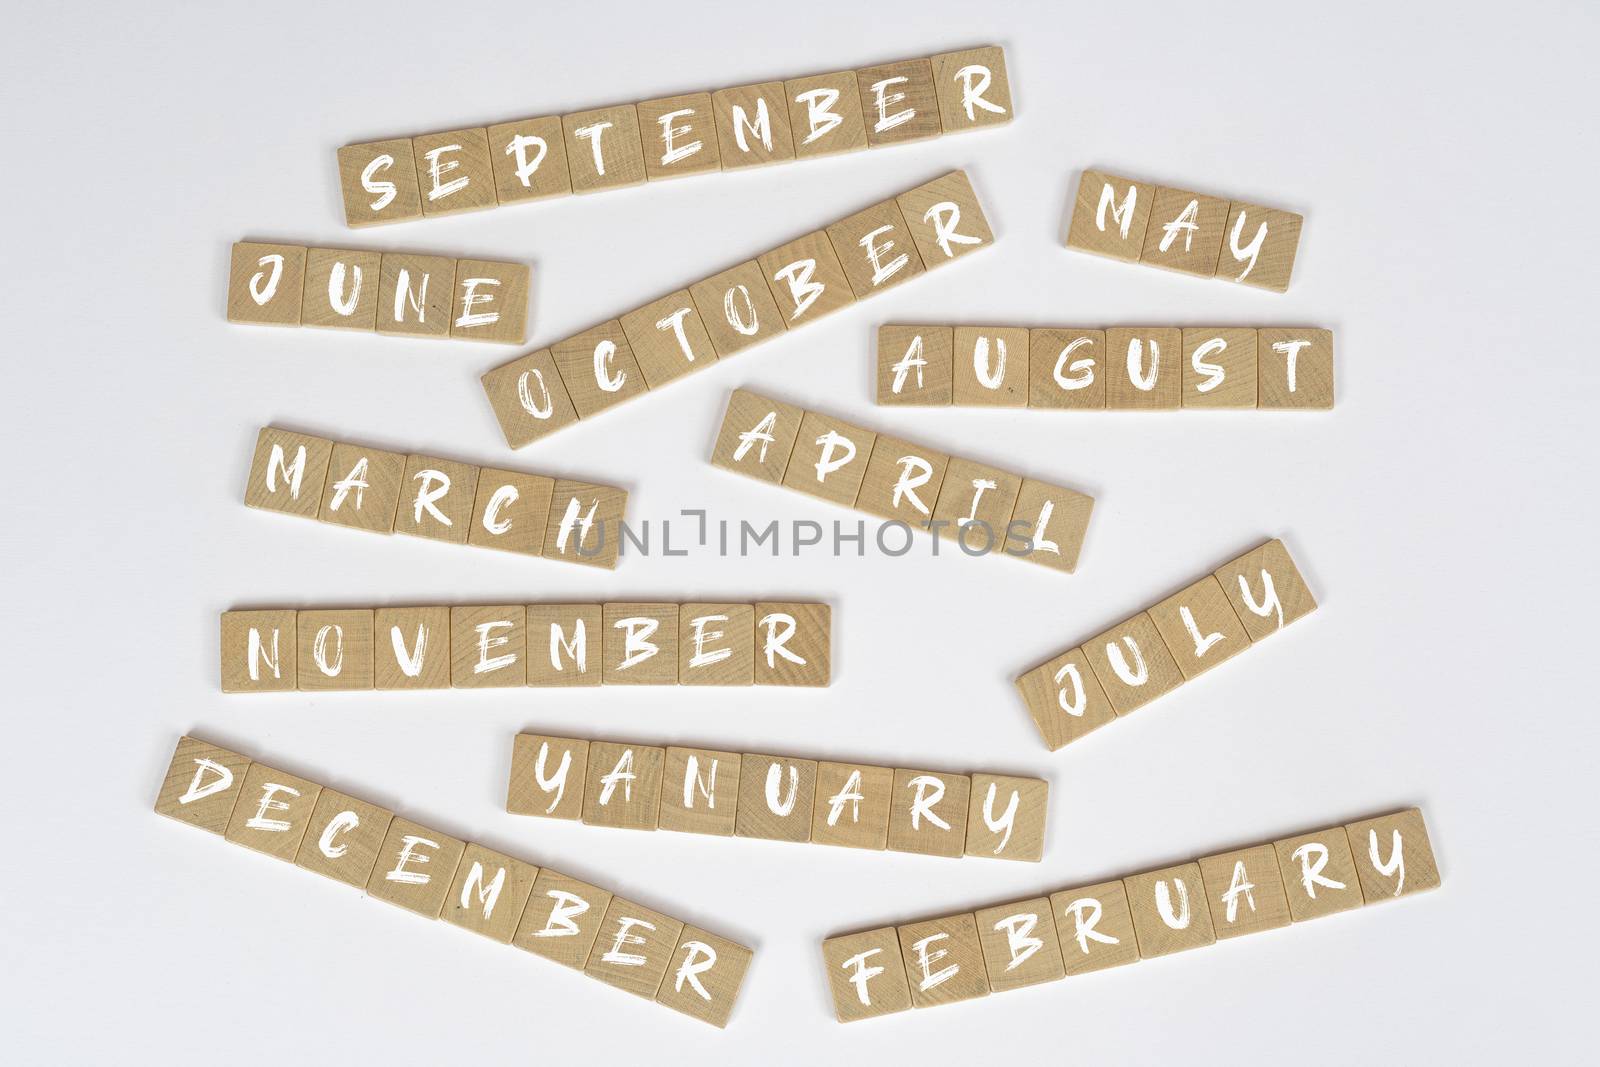 the months of the year written on wooden tiles